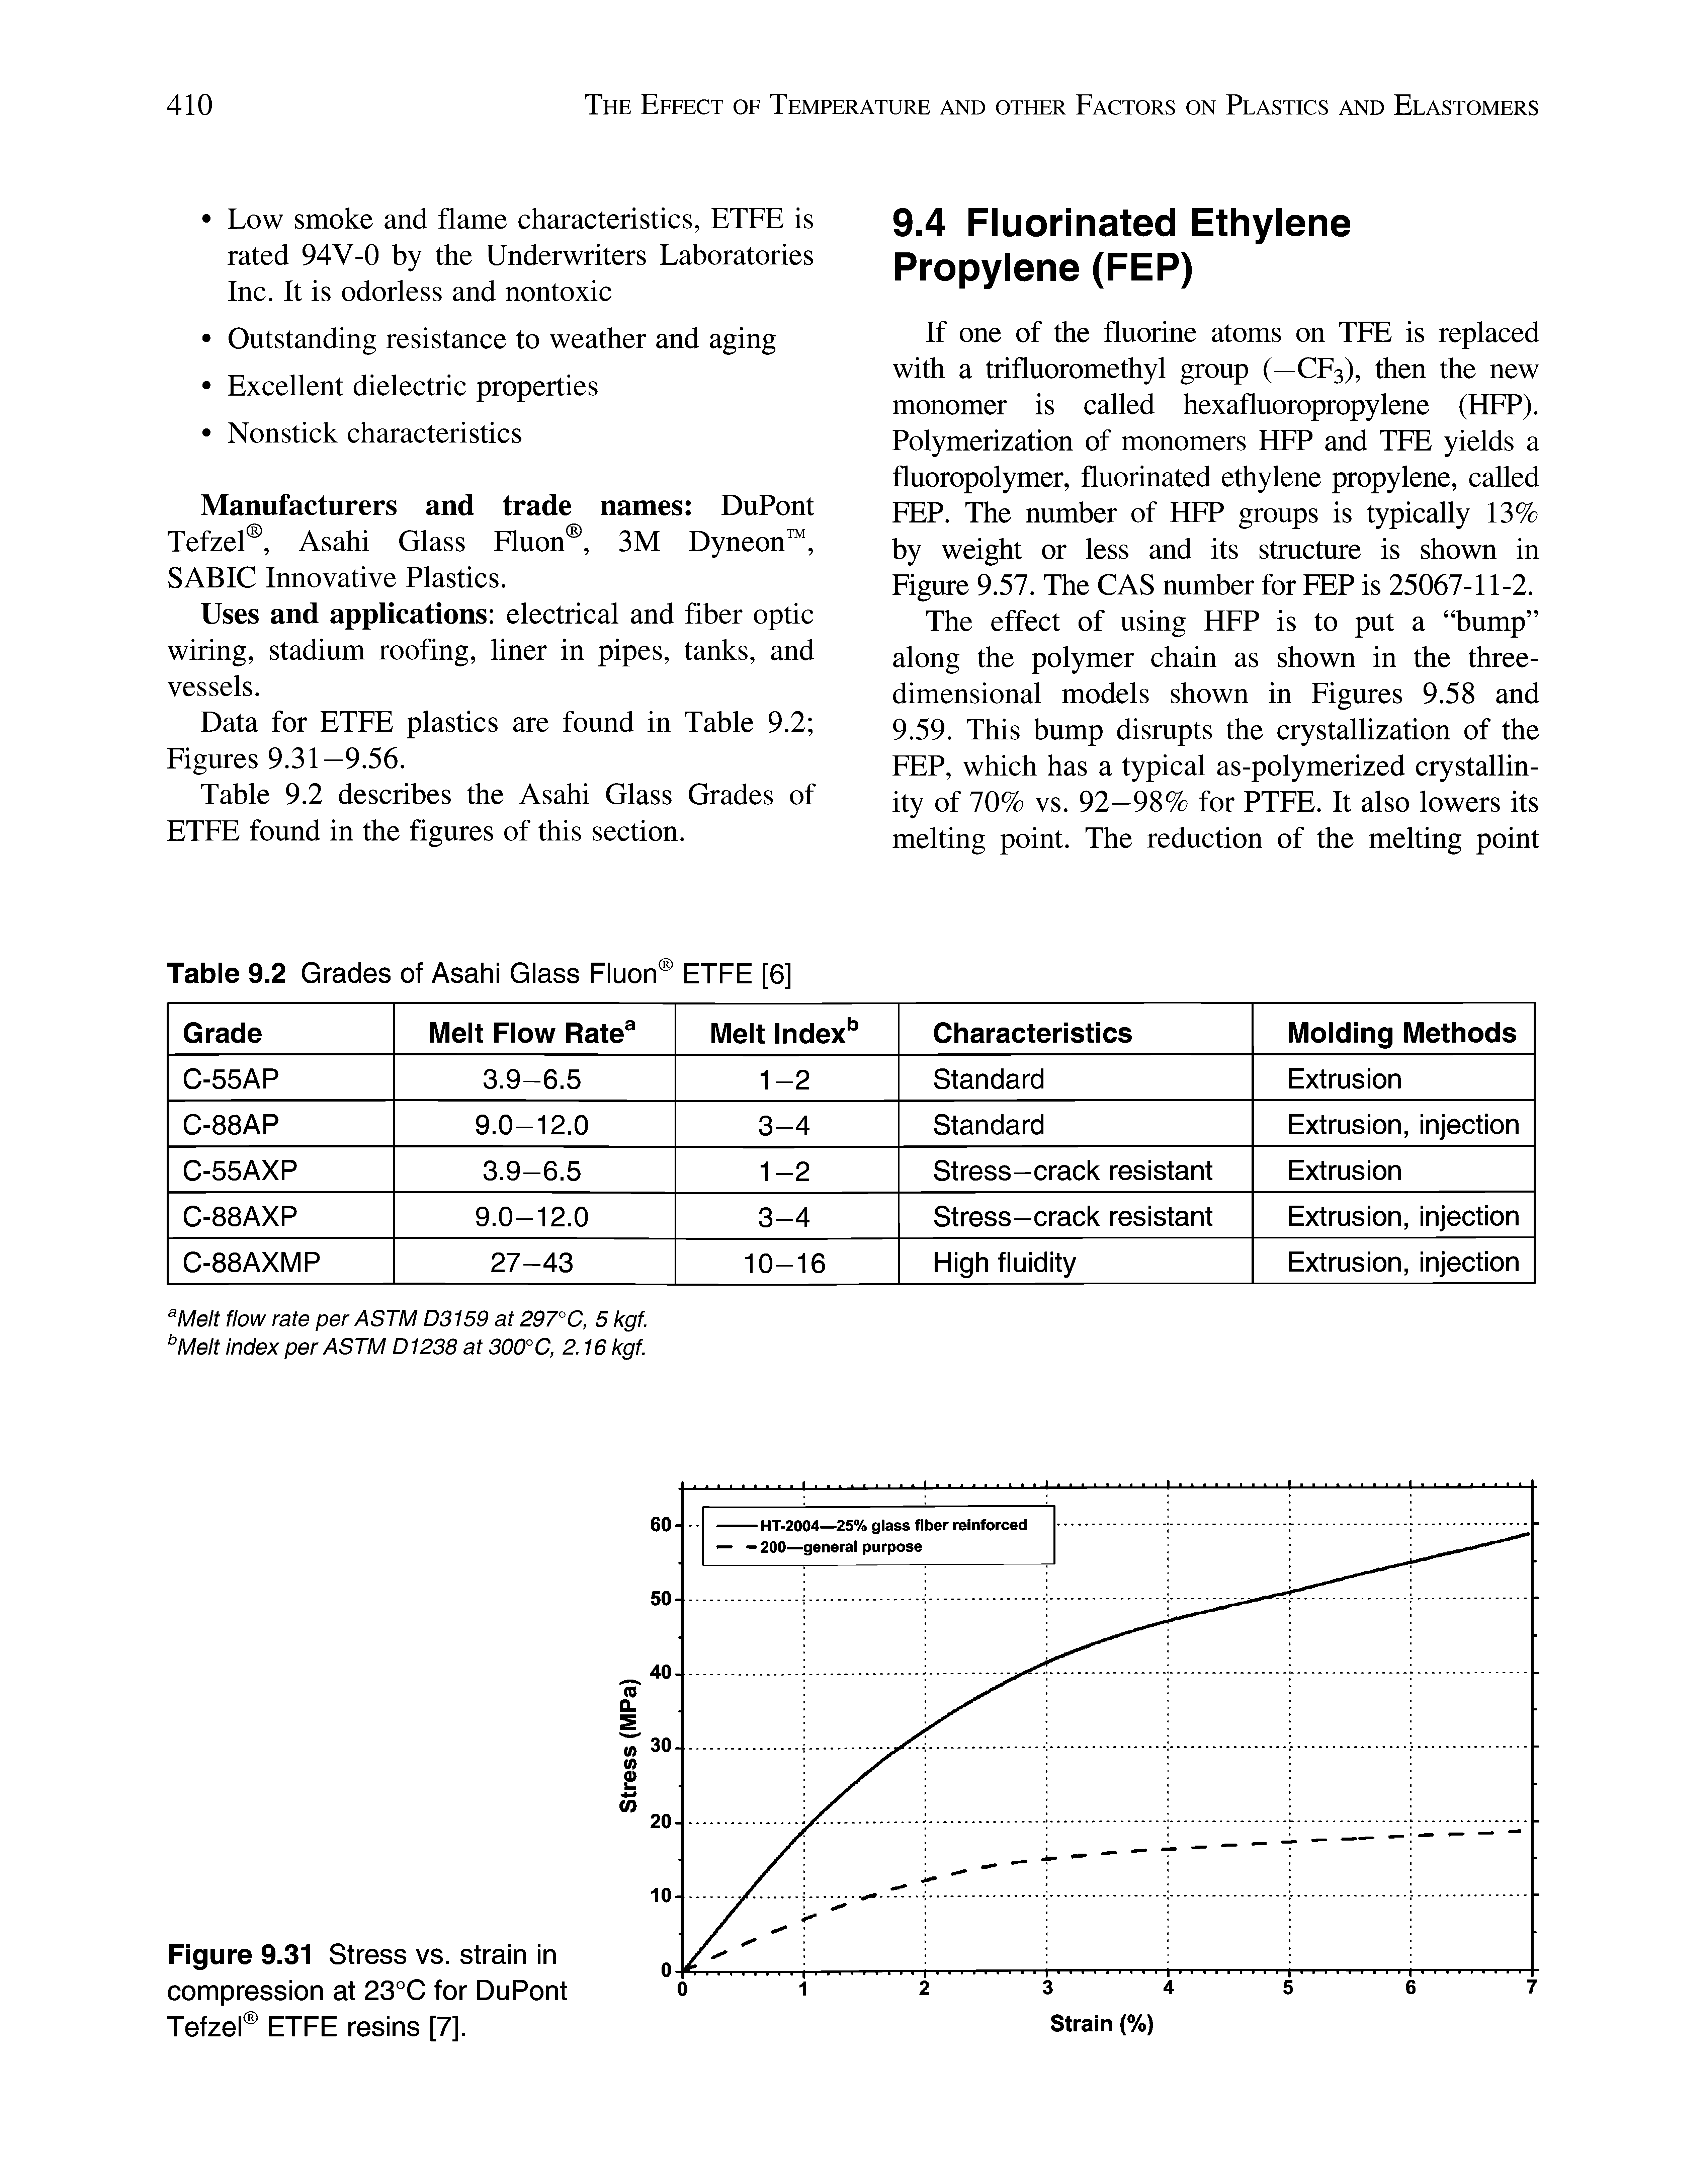 Figure 9.31 Stress vs. strain in compression at 23°C for DuPont Tefzel ETFE resins [7].